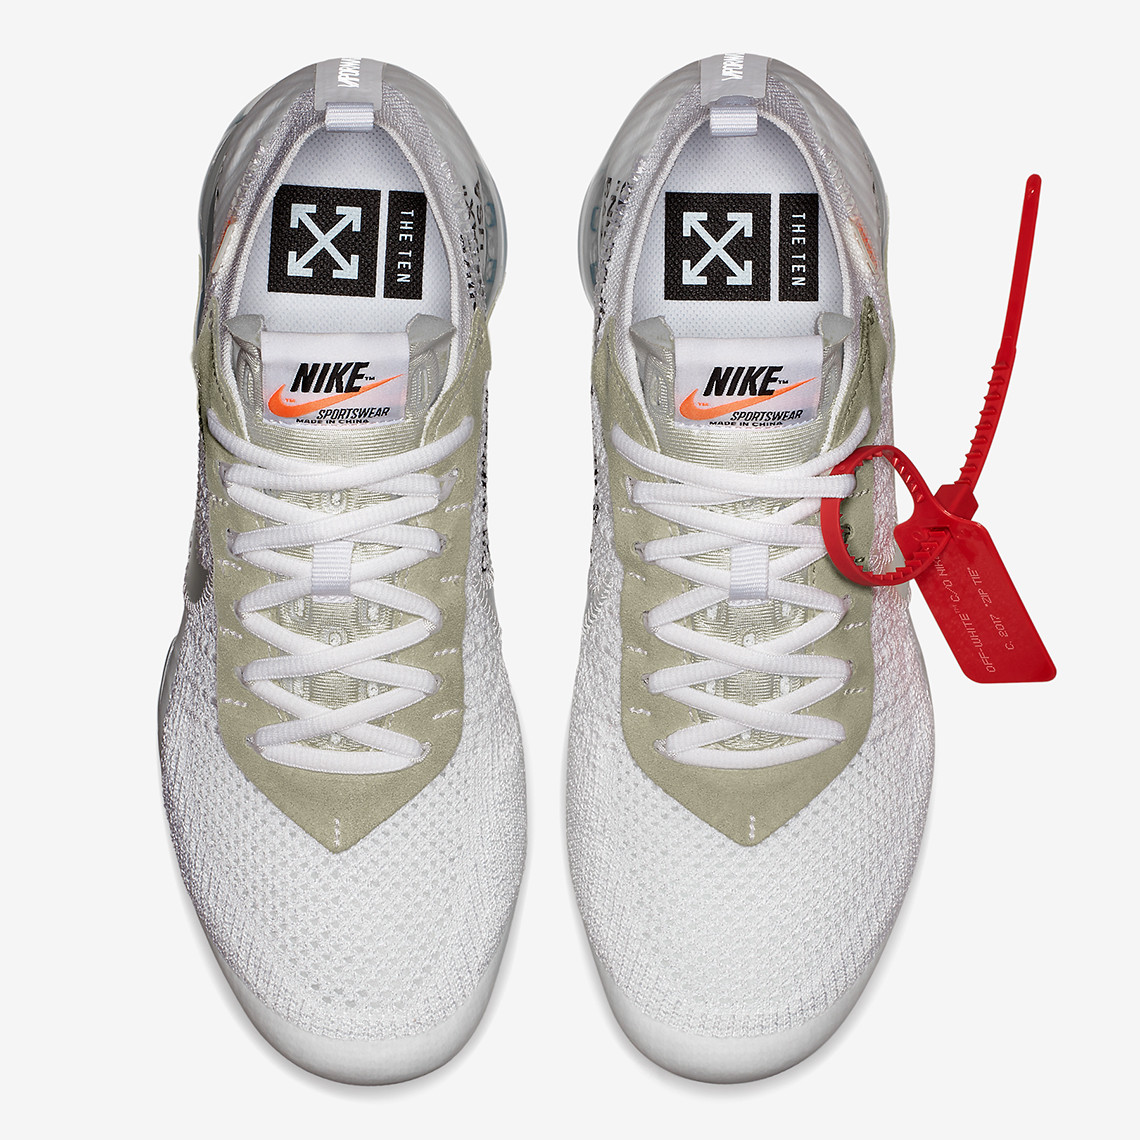 The Cut | REDDS | Enter The Raffle for the OFF WHITE x Nike Air VaporMax "White"